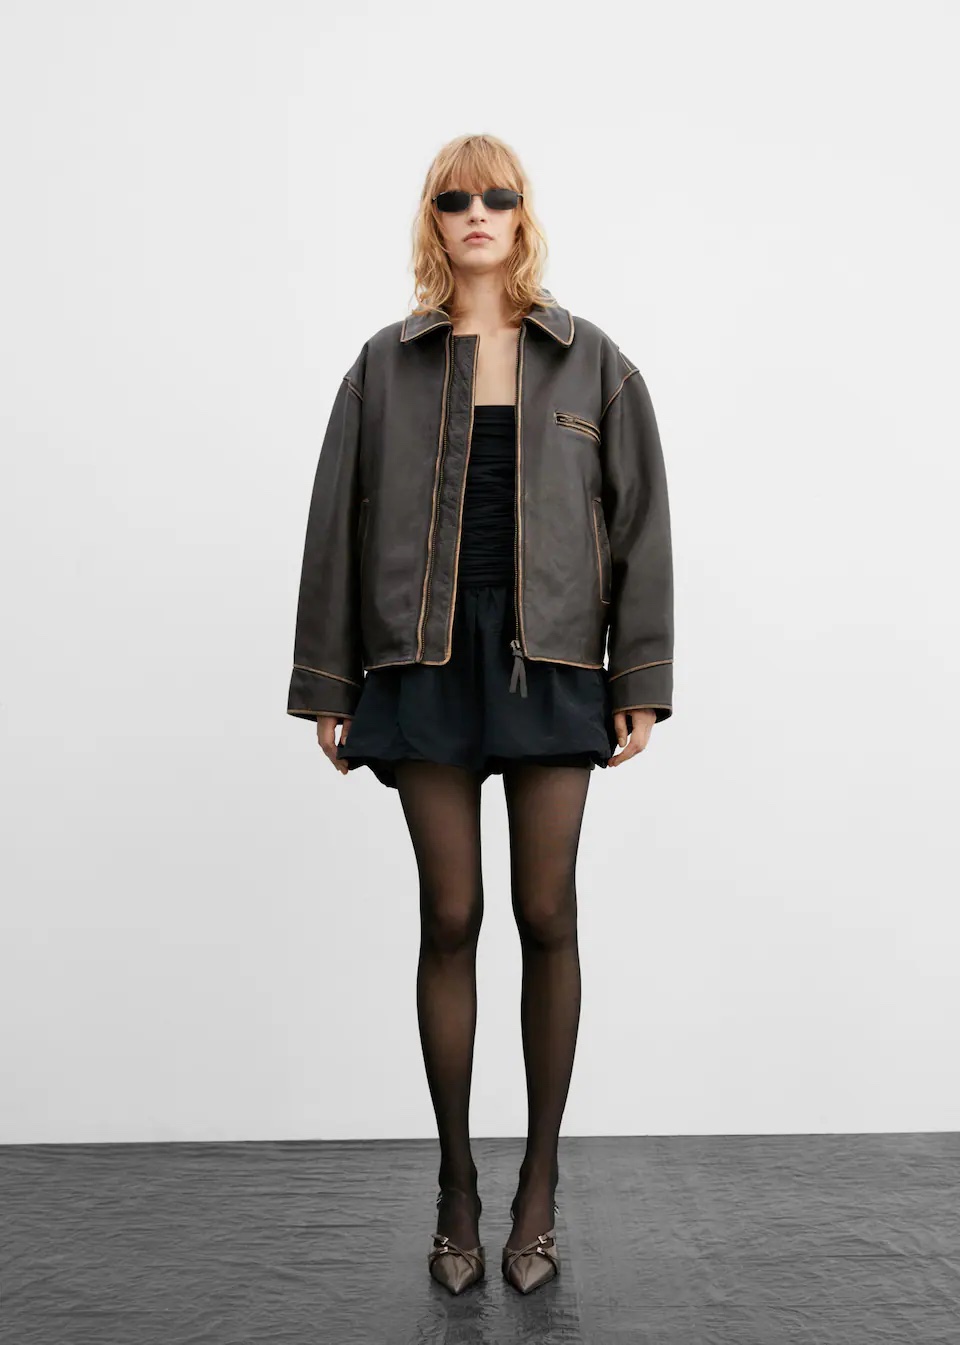 Brown Leather Jackets Are Autumn's Newest Trend | Who What Wear UK